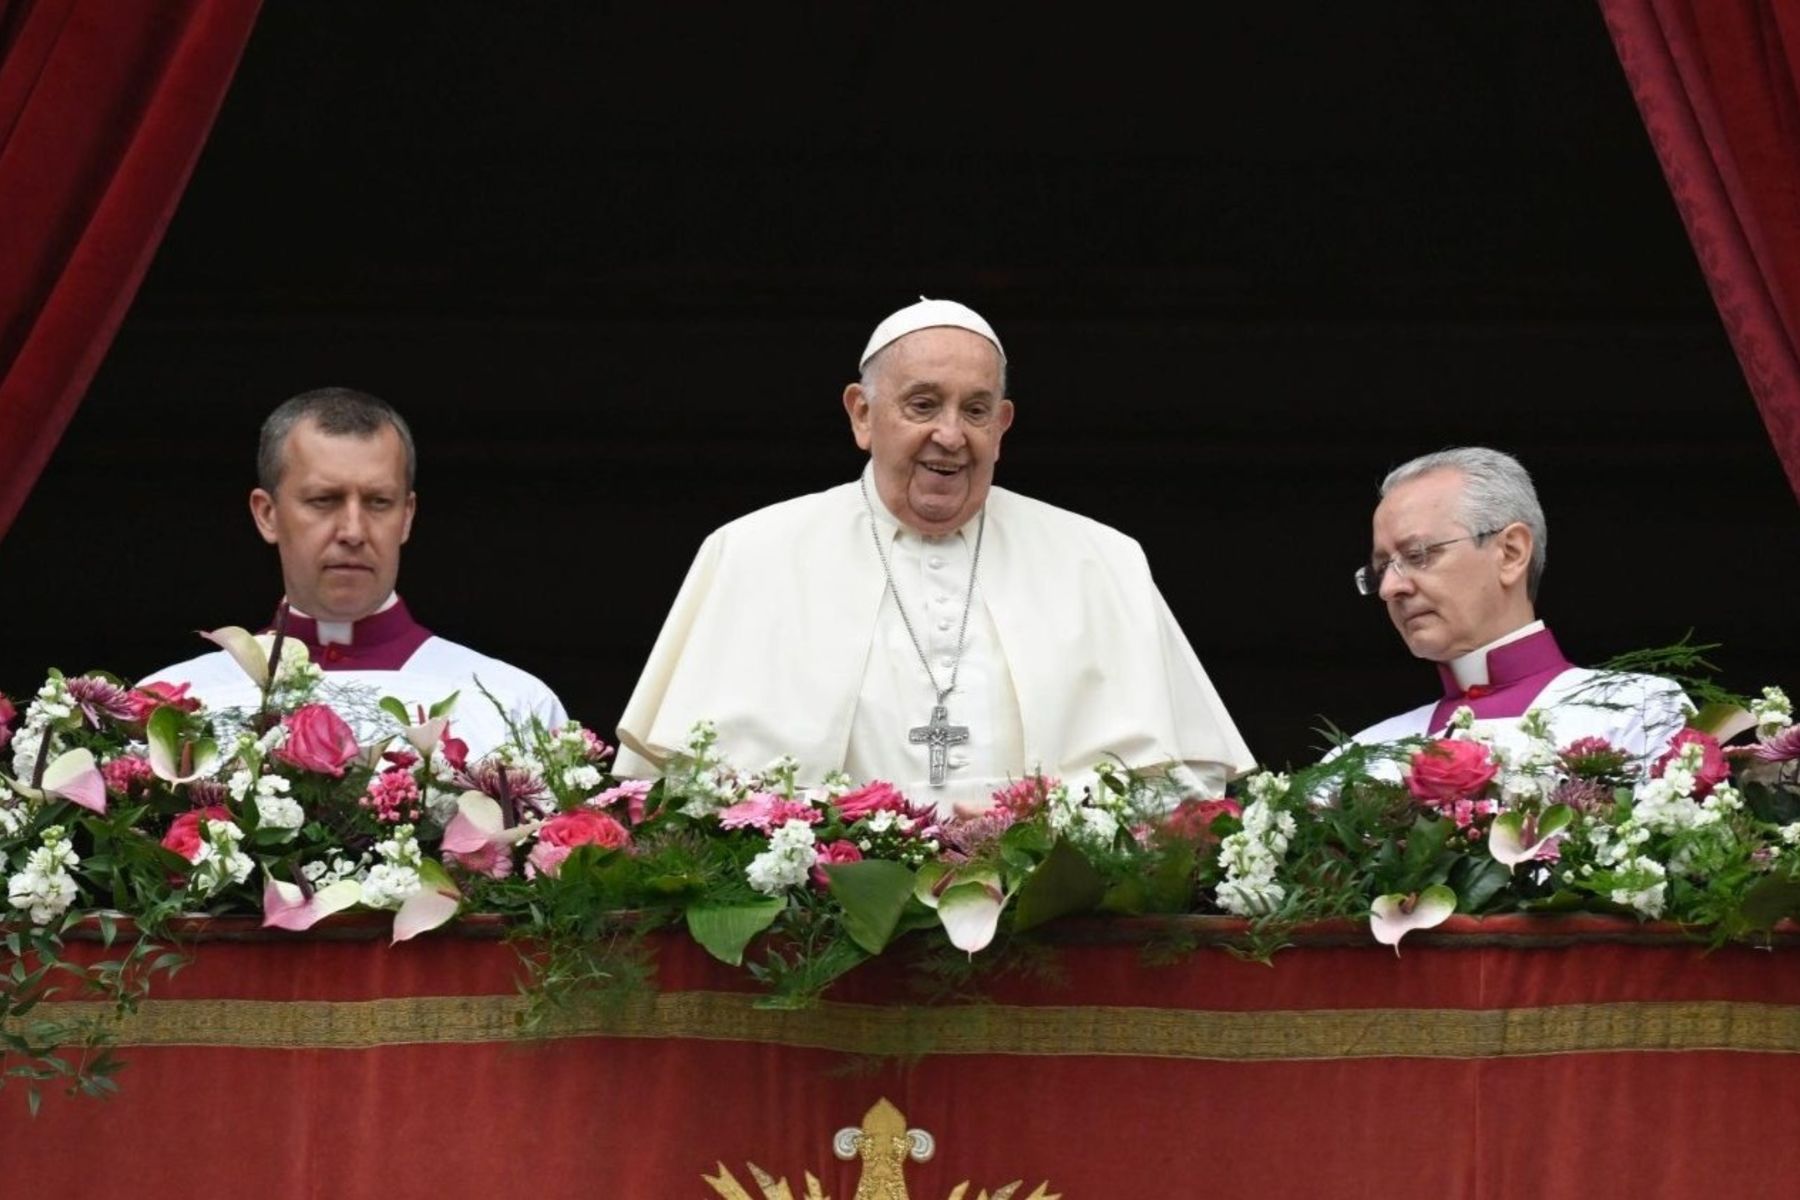 Pope Francis Calls For “All for All” Prisoner Exchange in His Easter